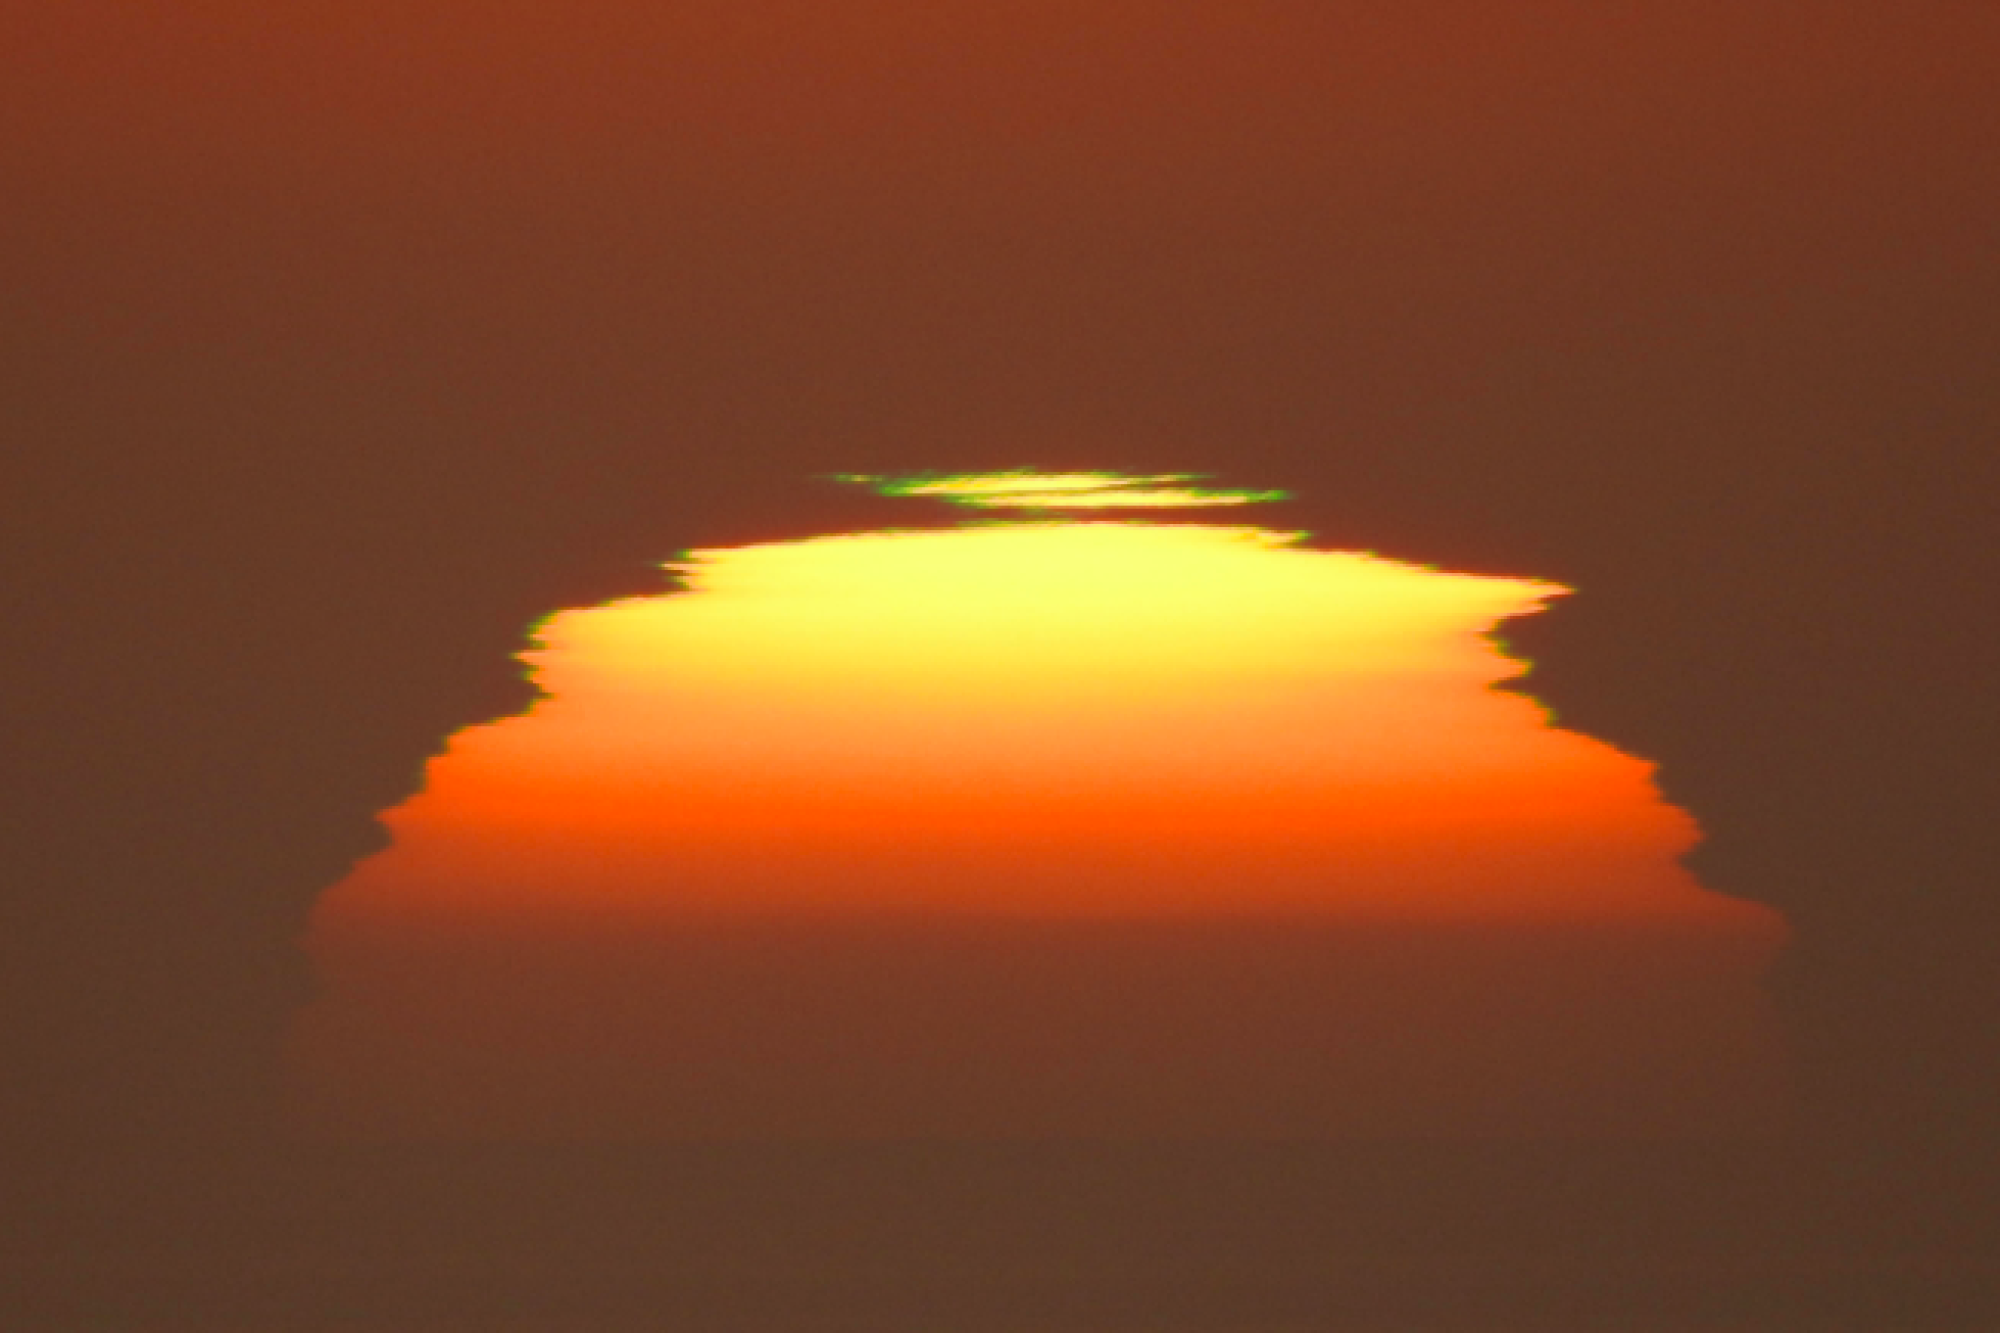 The view of the sun is distorted by heat.